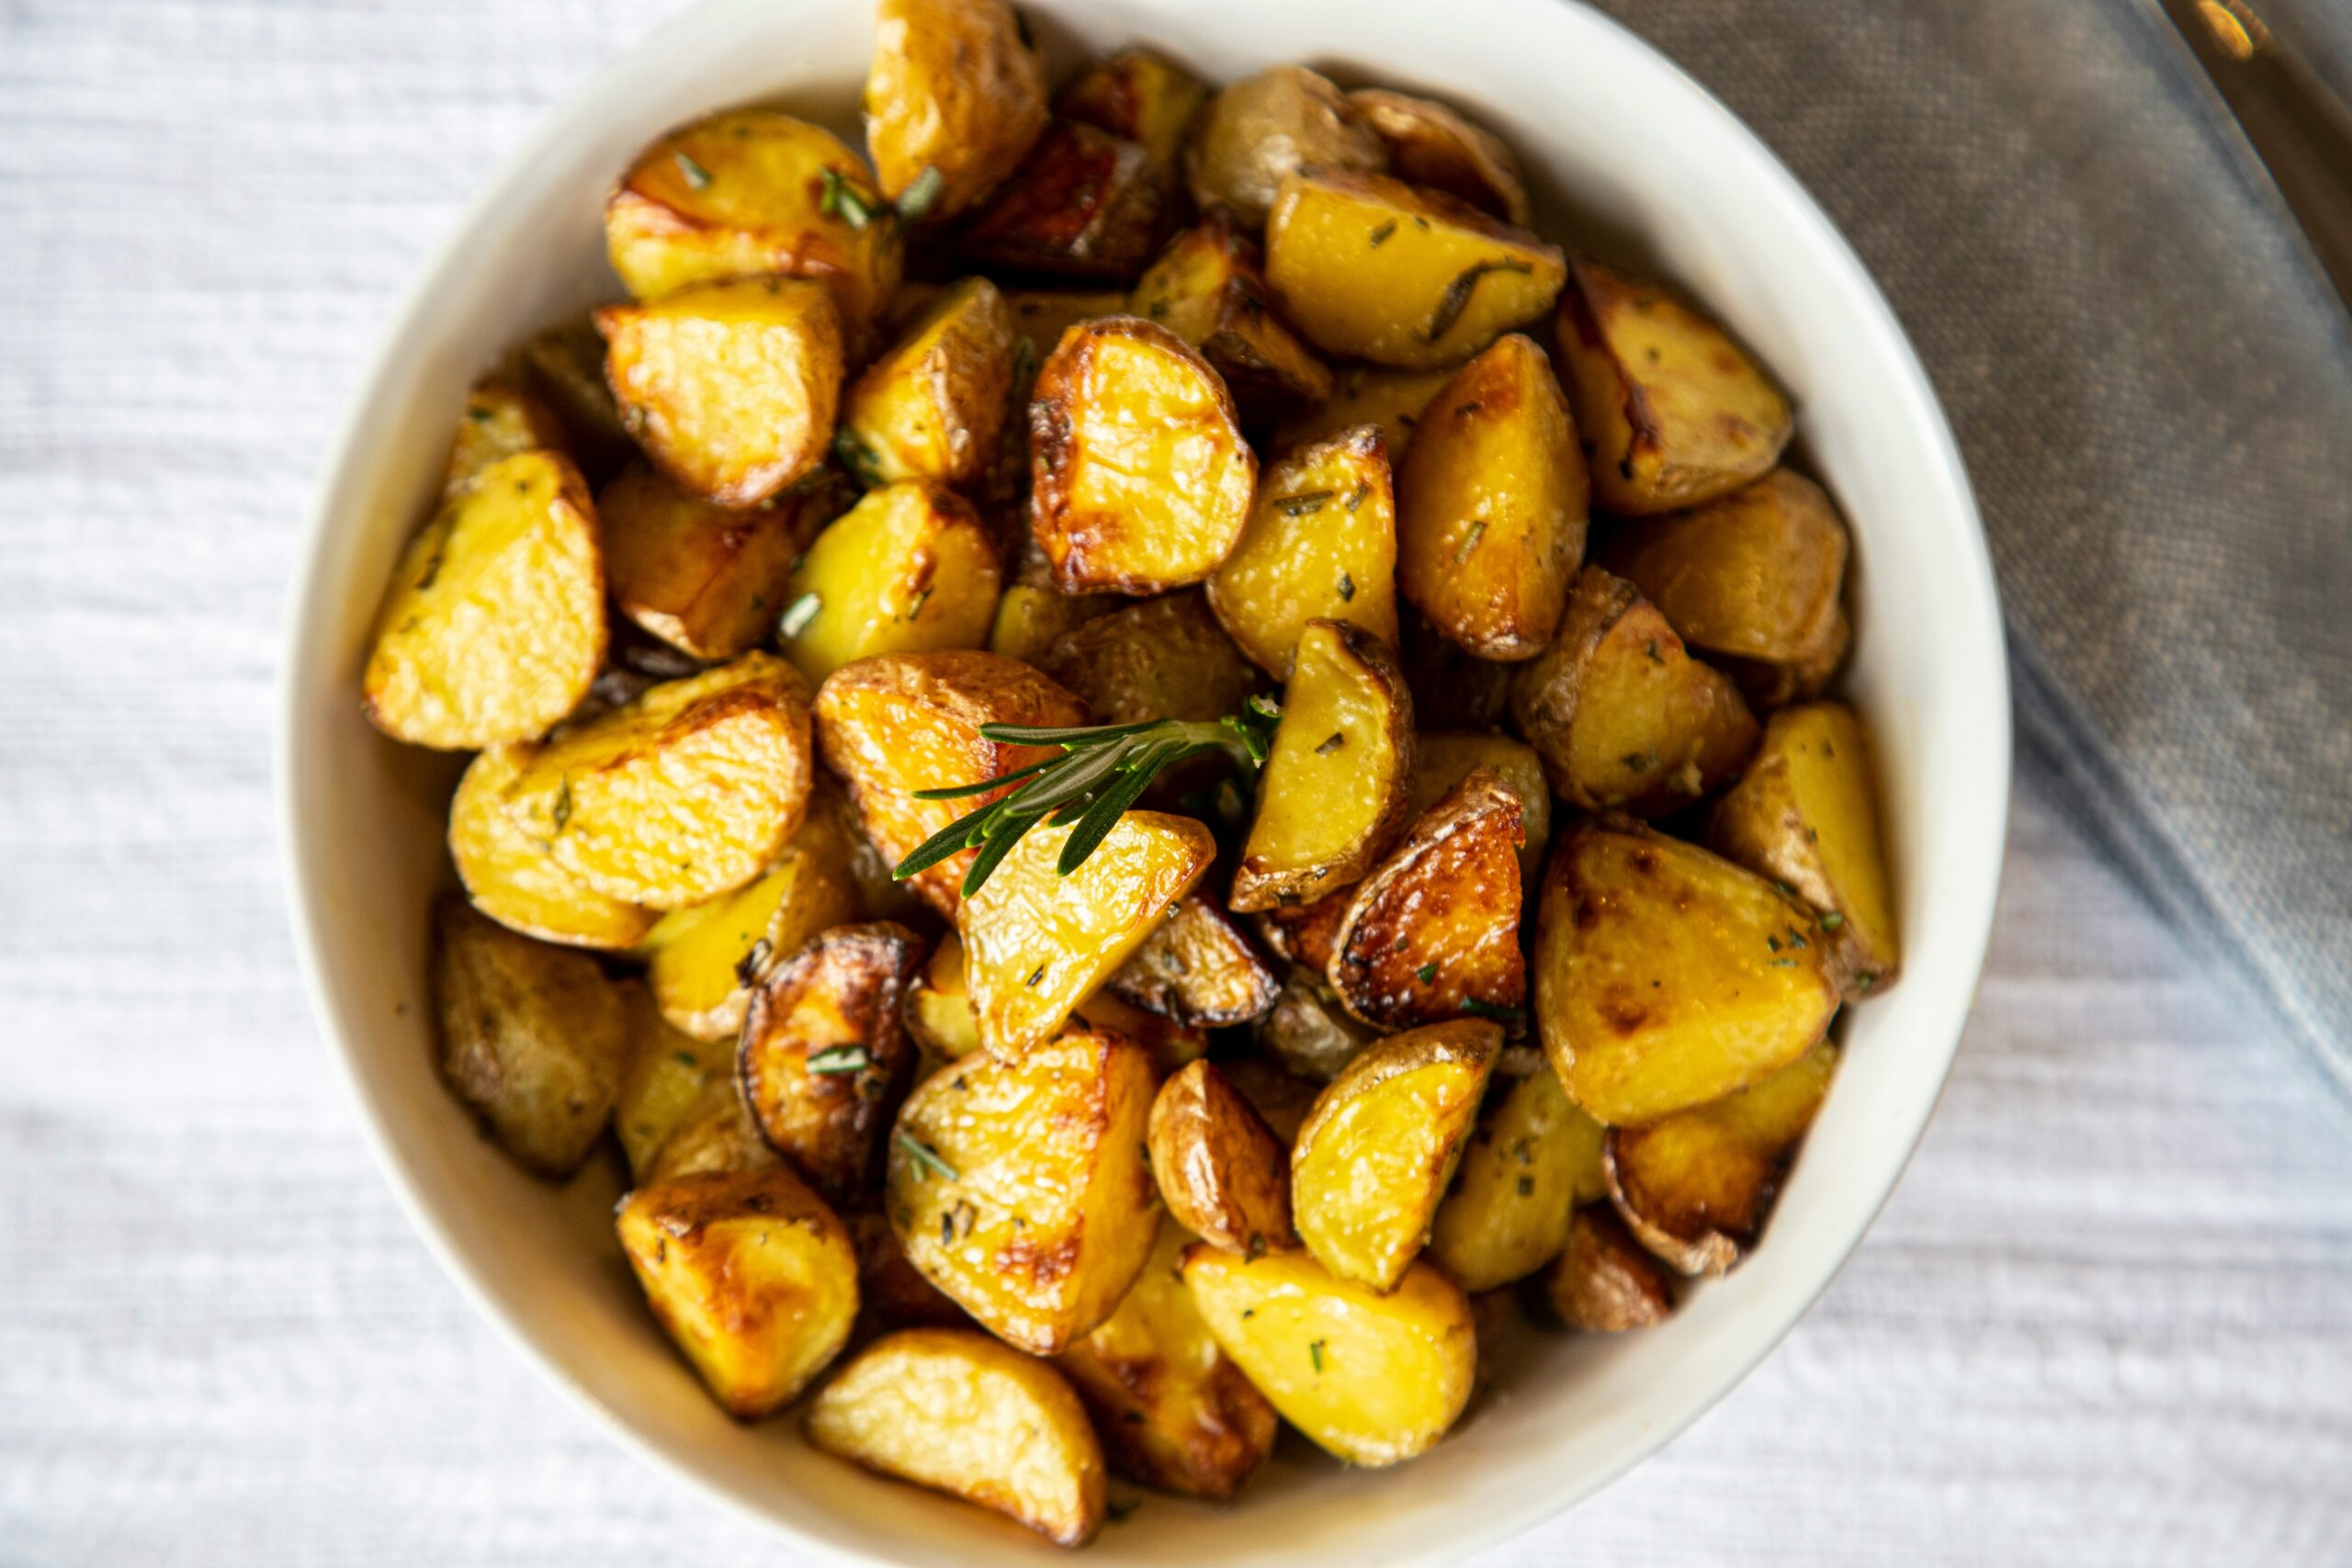 For a Valentine's Day dinner idea, check out these sides that pair well with steak. Pictured: Roasted potatoes